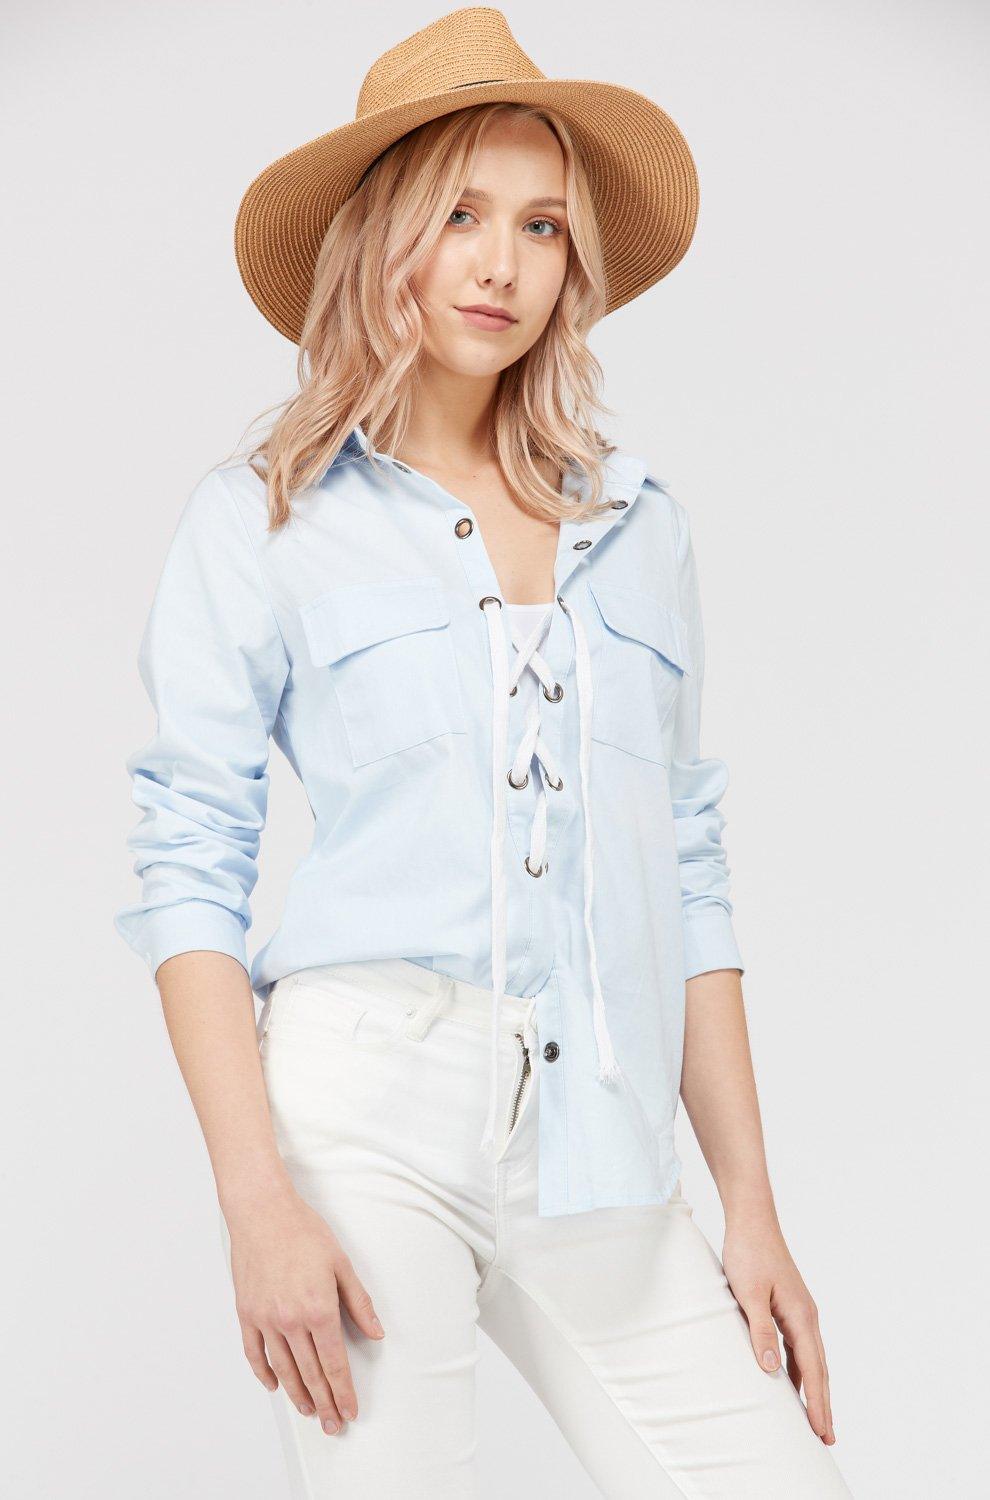 Women's Lace Up Blouse Top - Brand My Case